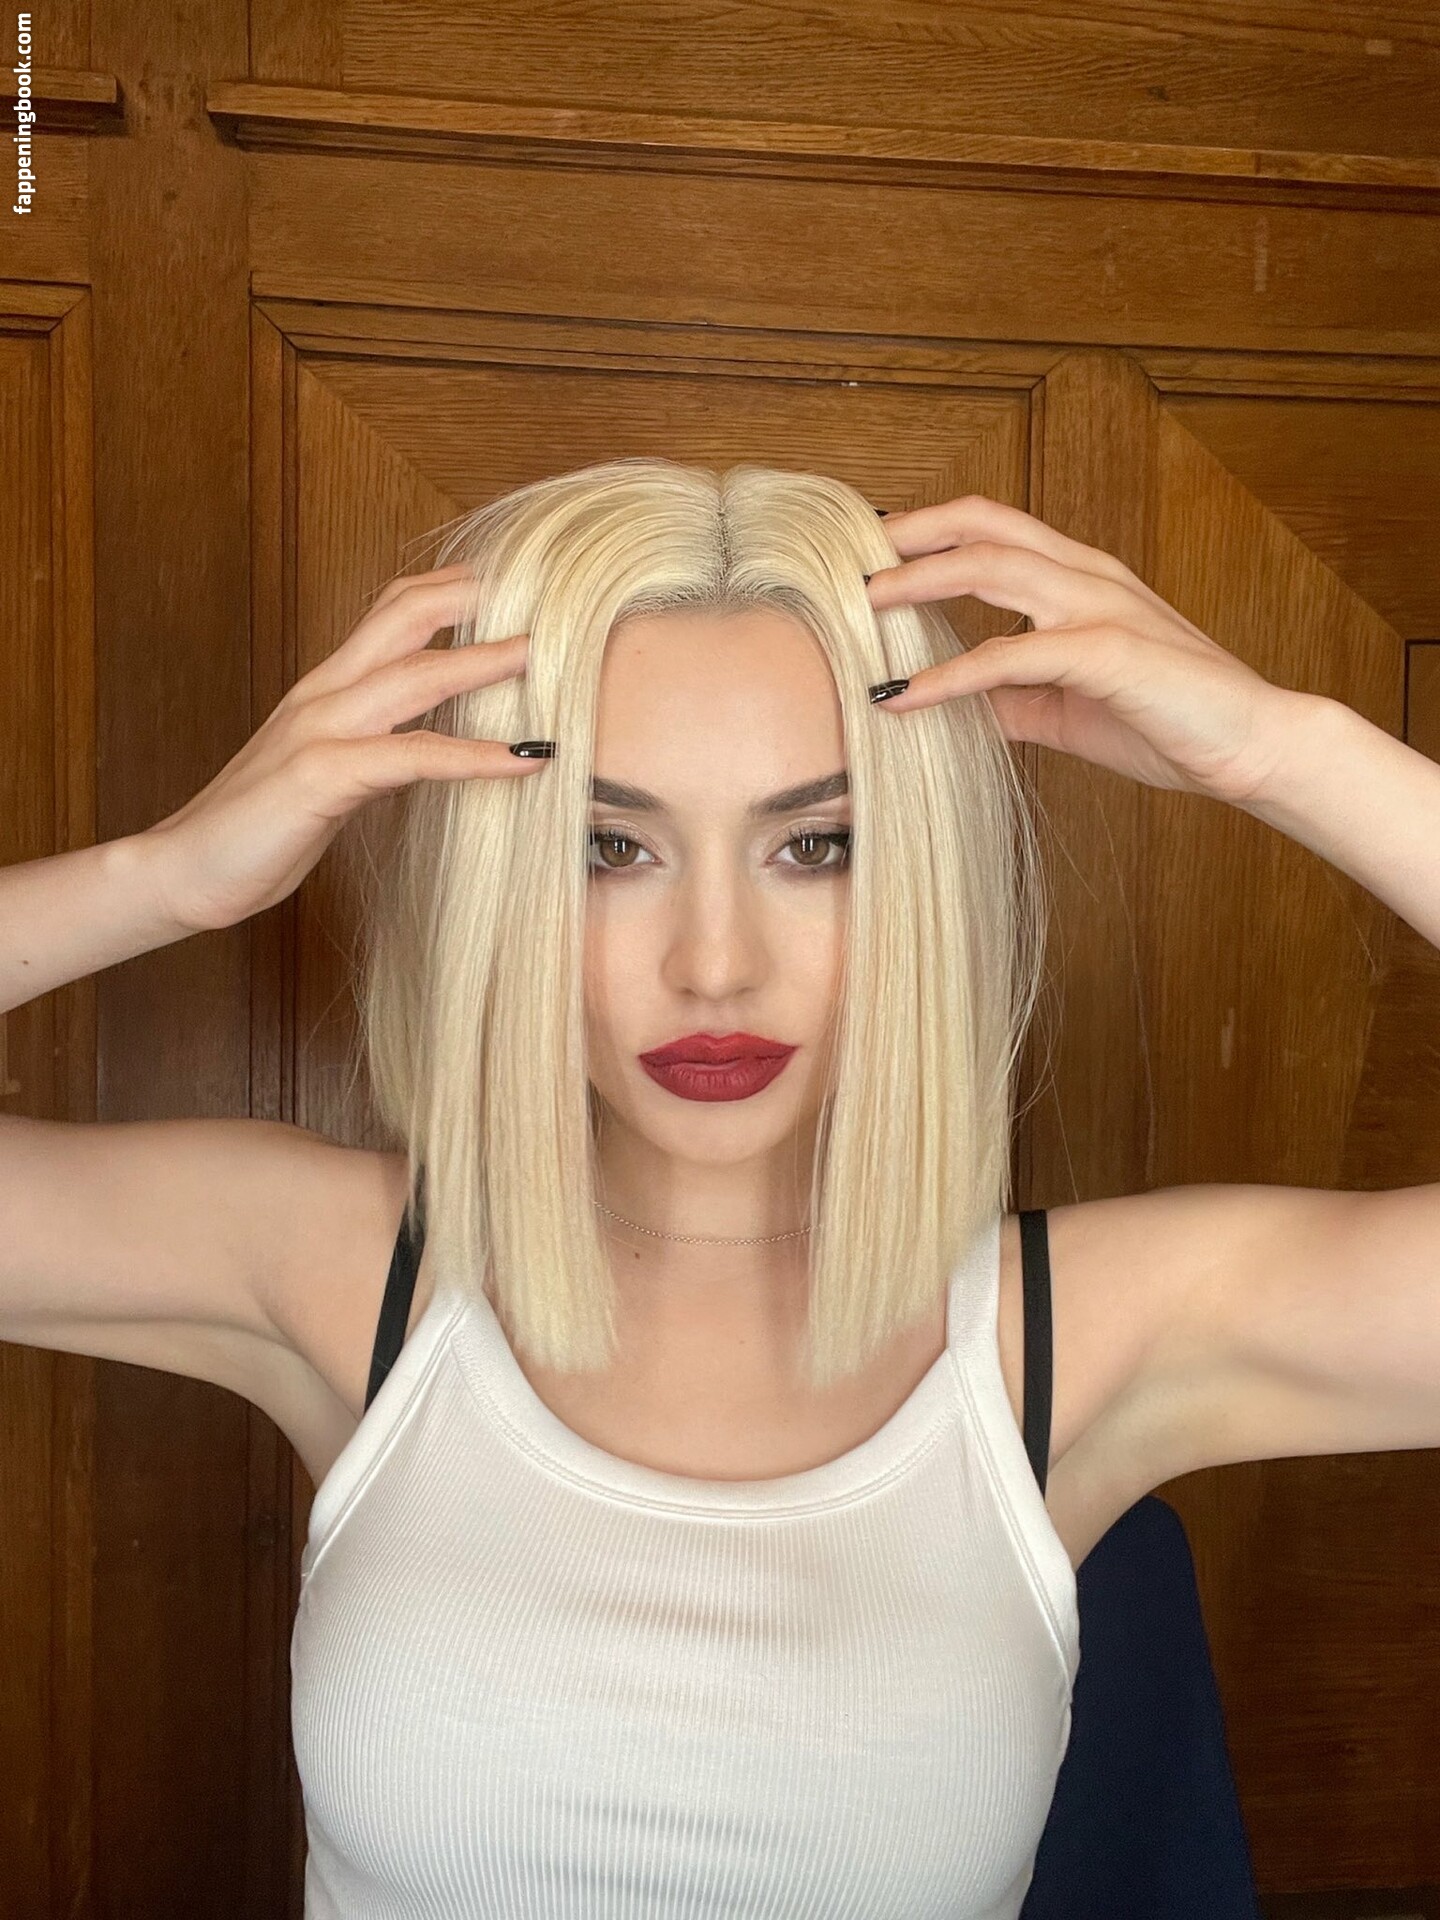 Ava Max / plharleyquinn Nude, OnlyFans Leaks, The Fappening Photo